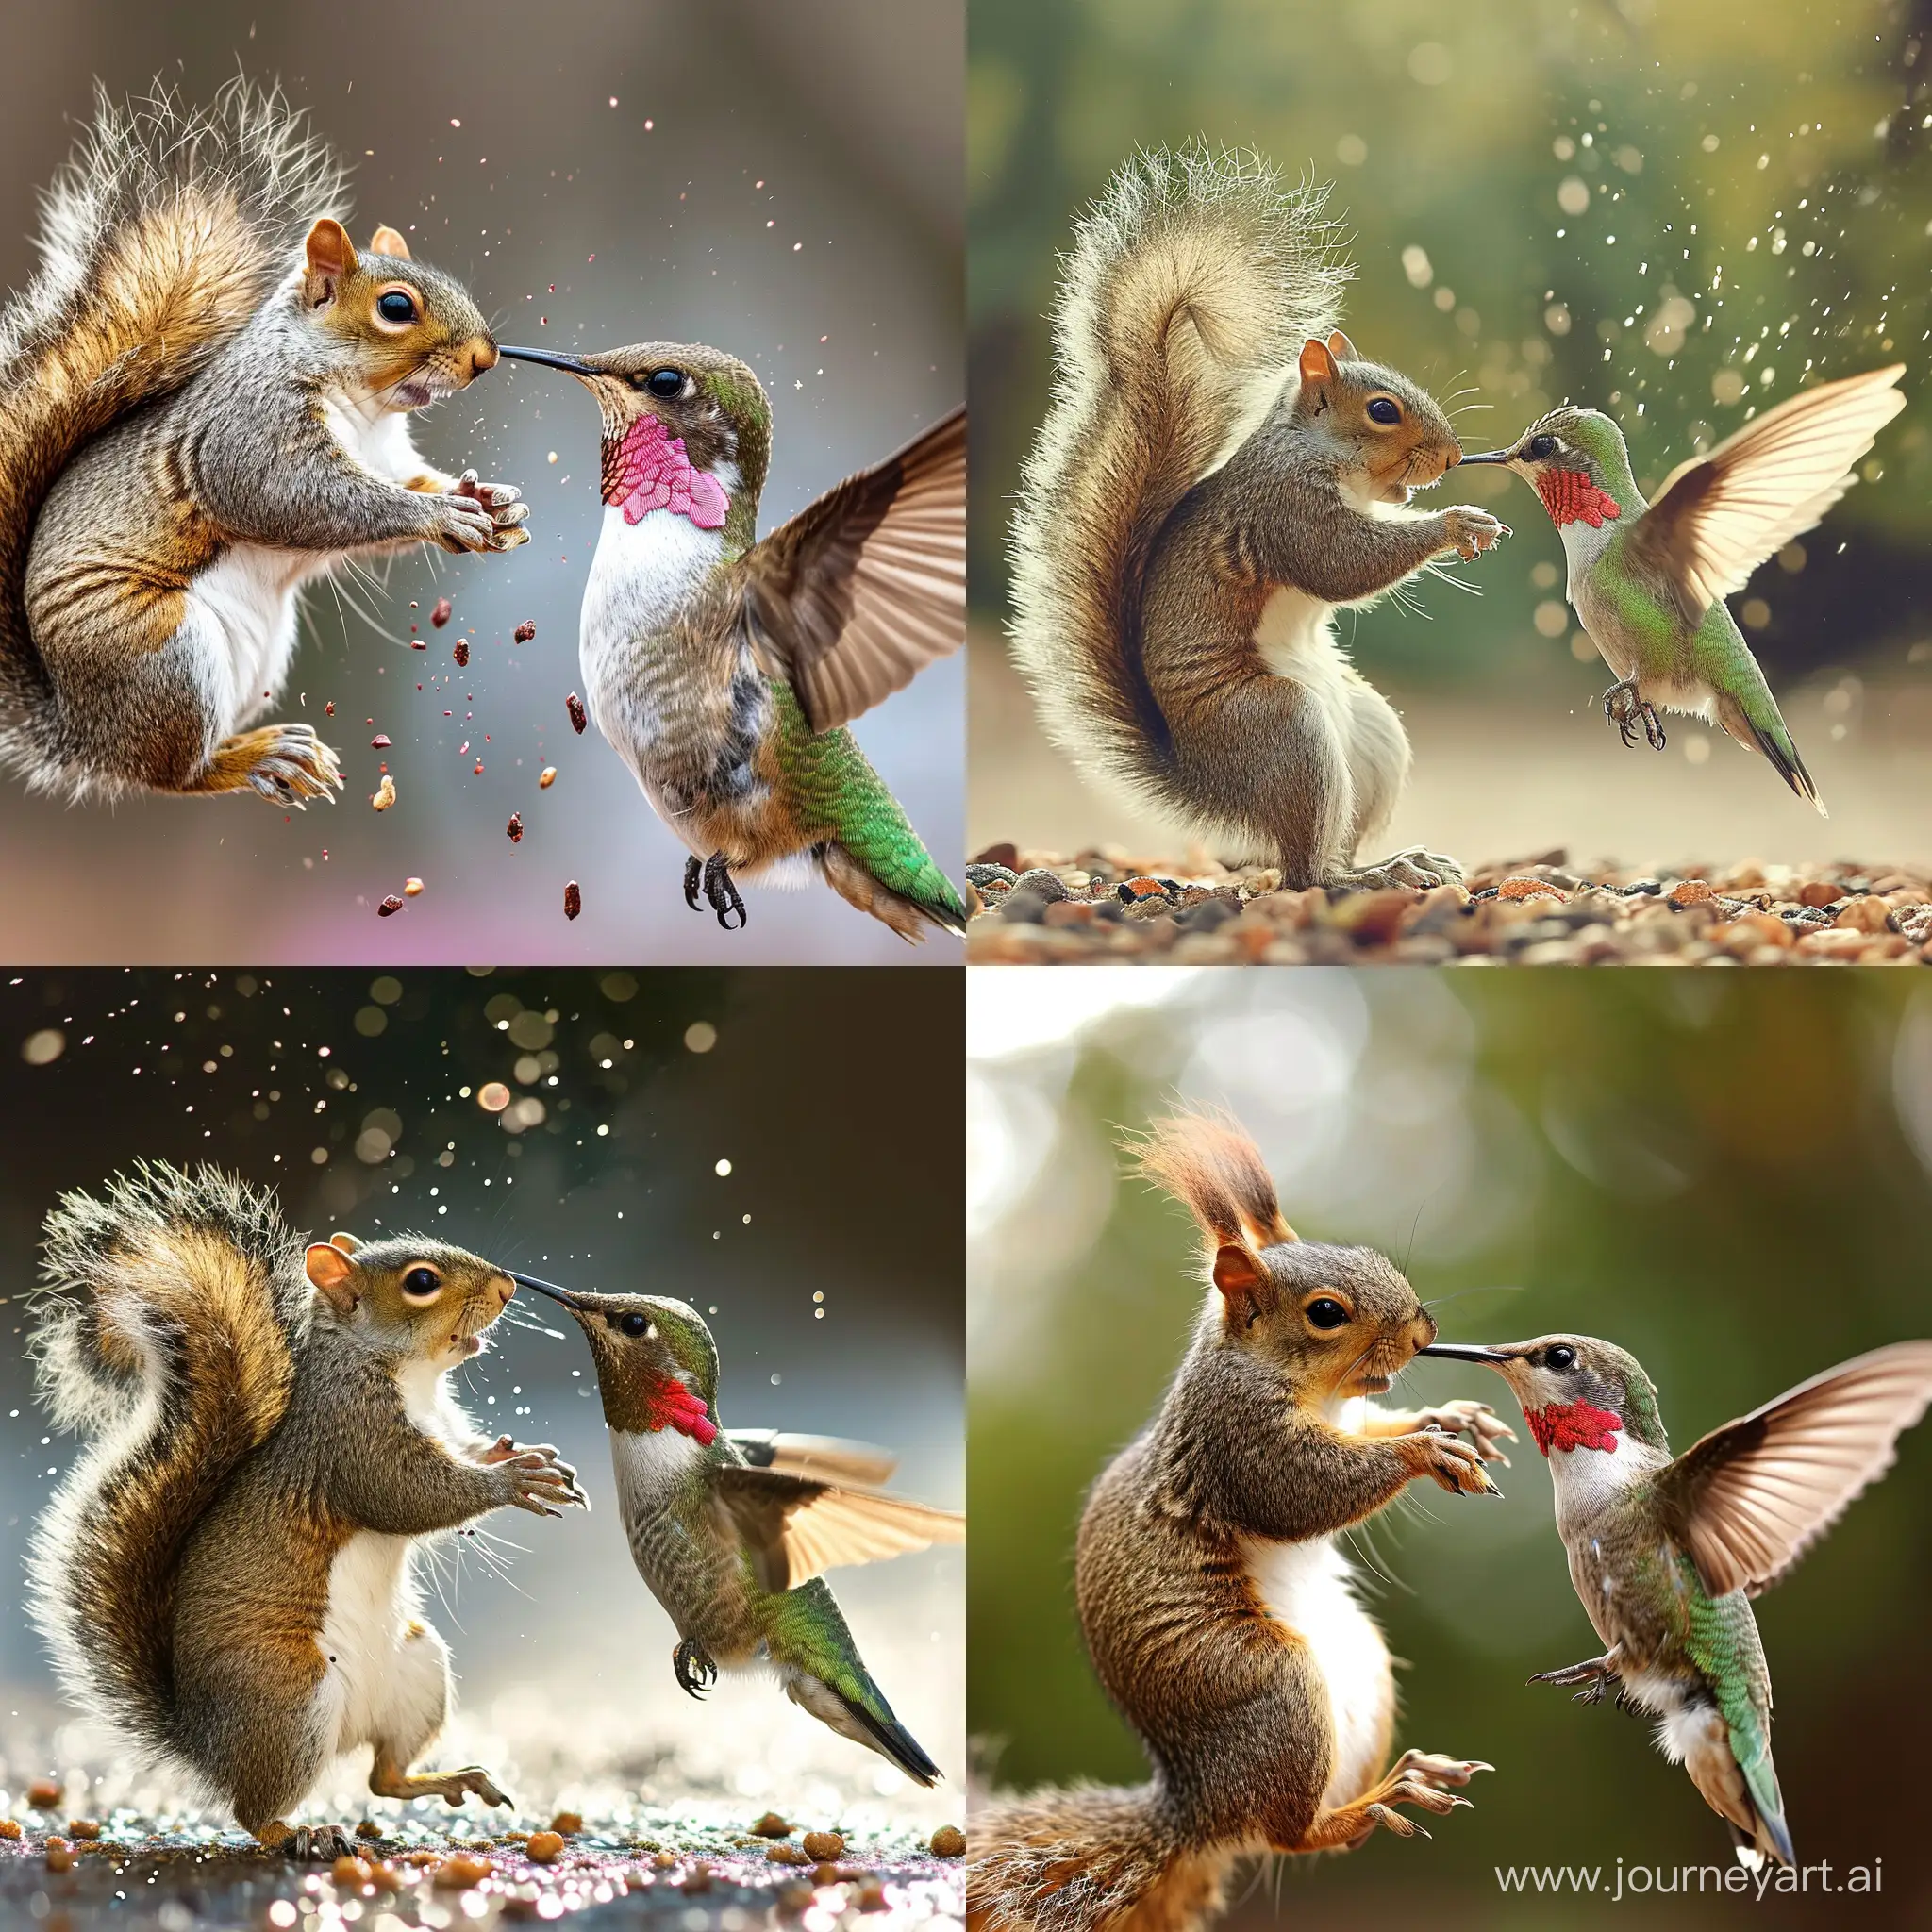 Epic-Battle-Squirrel-vs-Hummingbird-in-a-Fight-to-the-Death